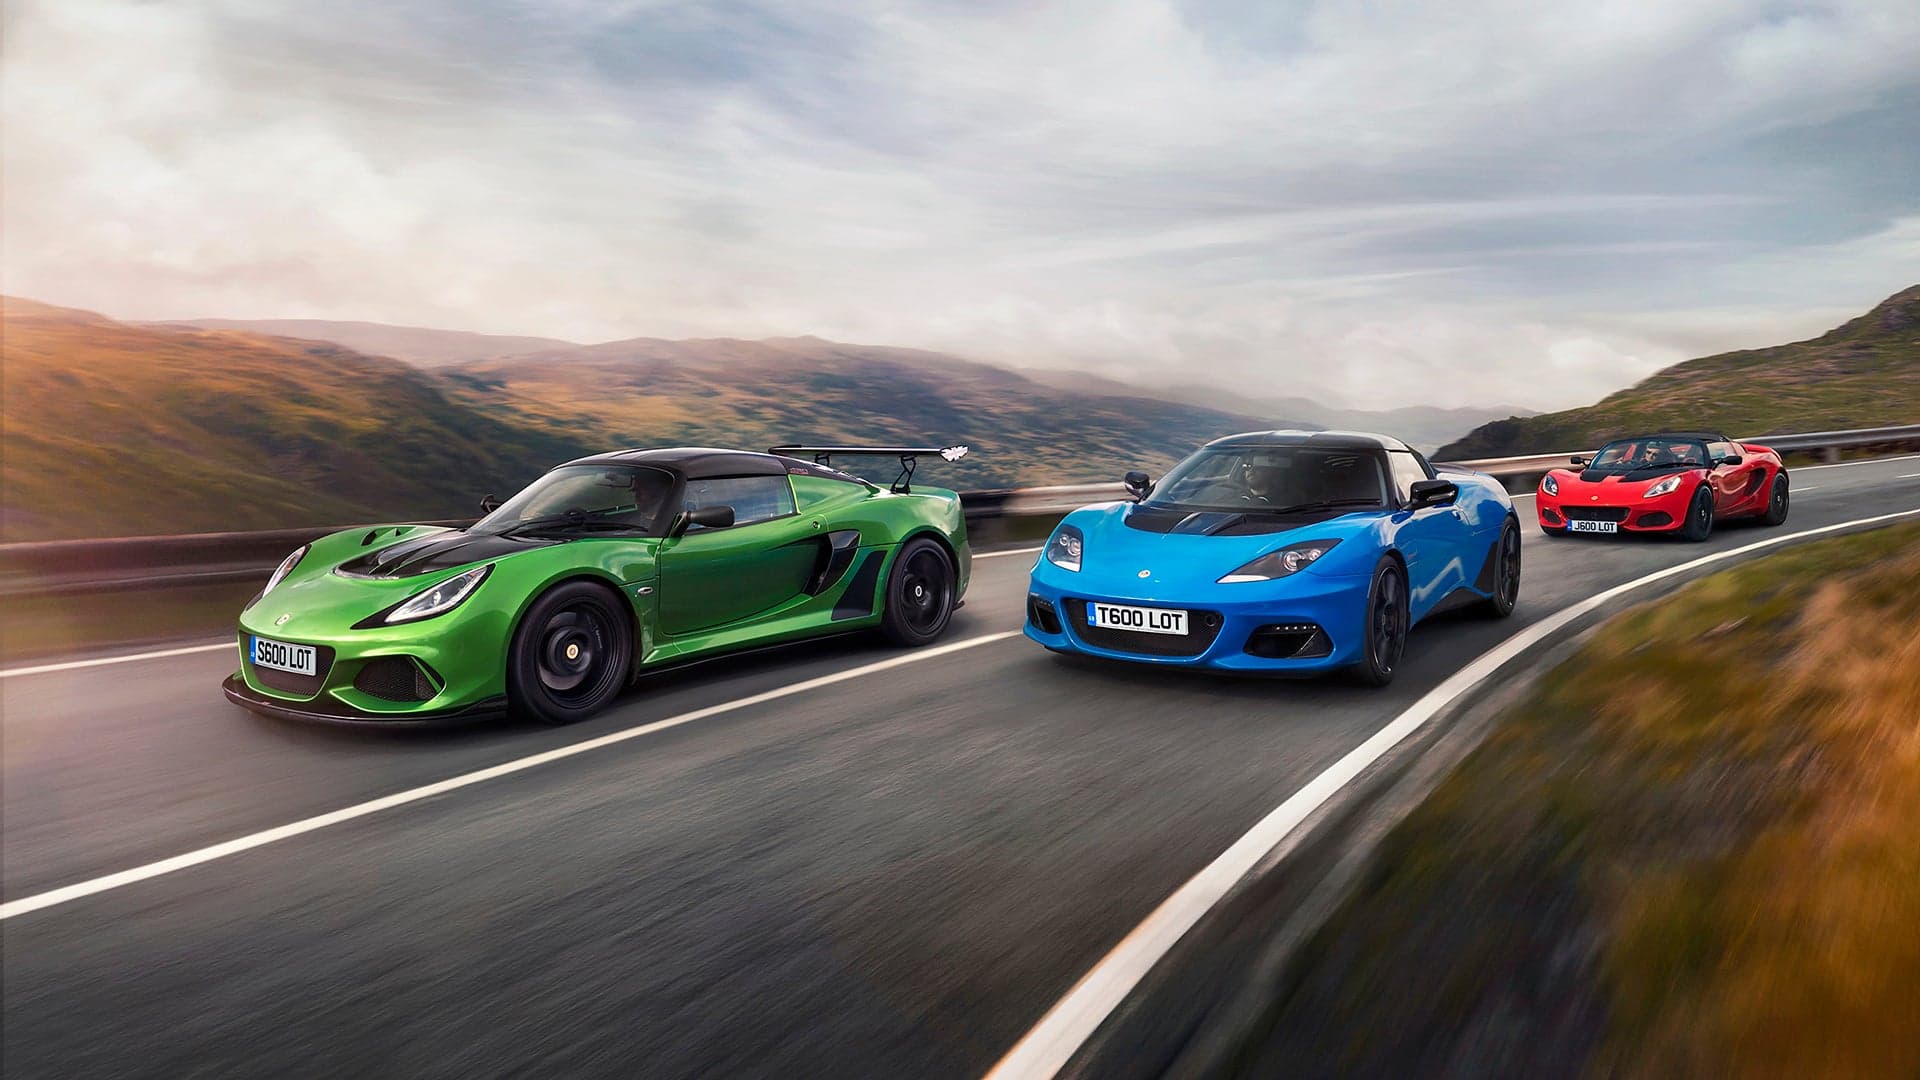 Lotus Teams Up With Renault’s Alpine to Develop an Electric Sports Car